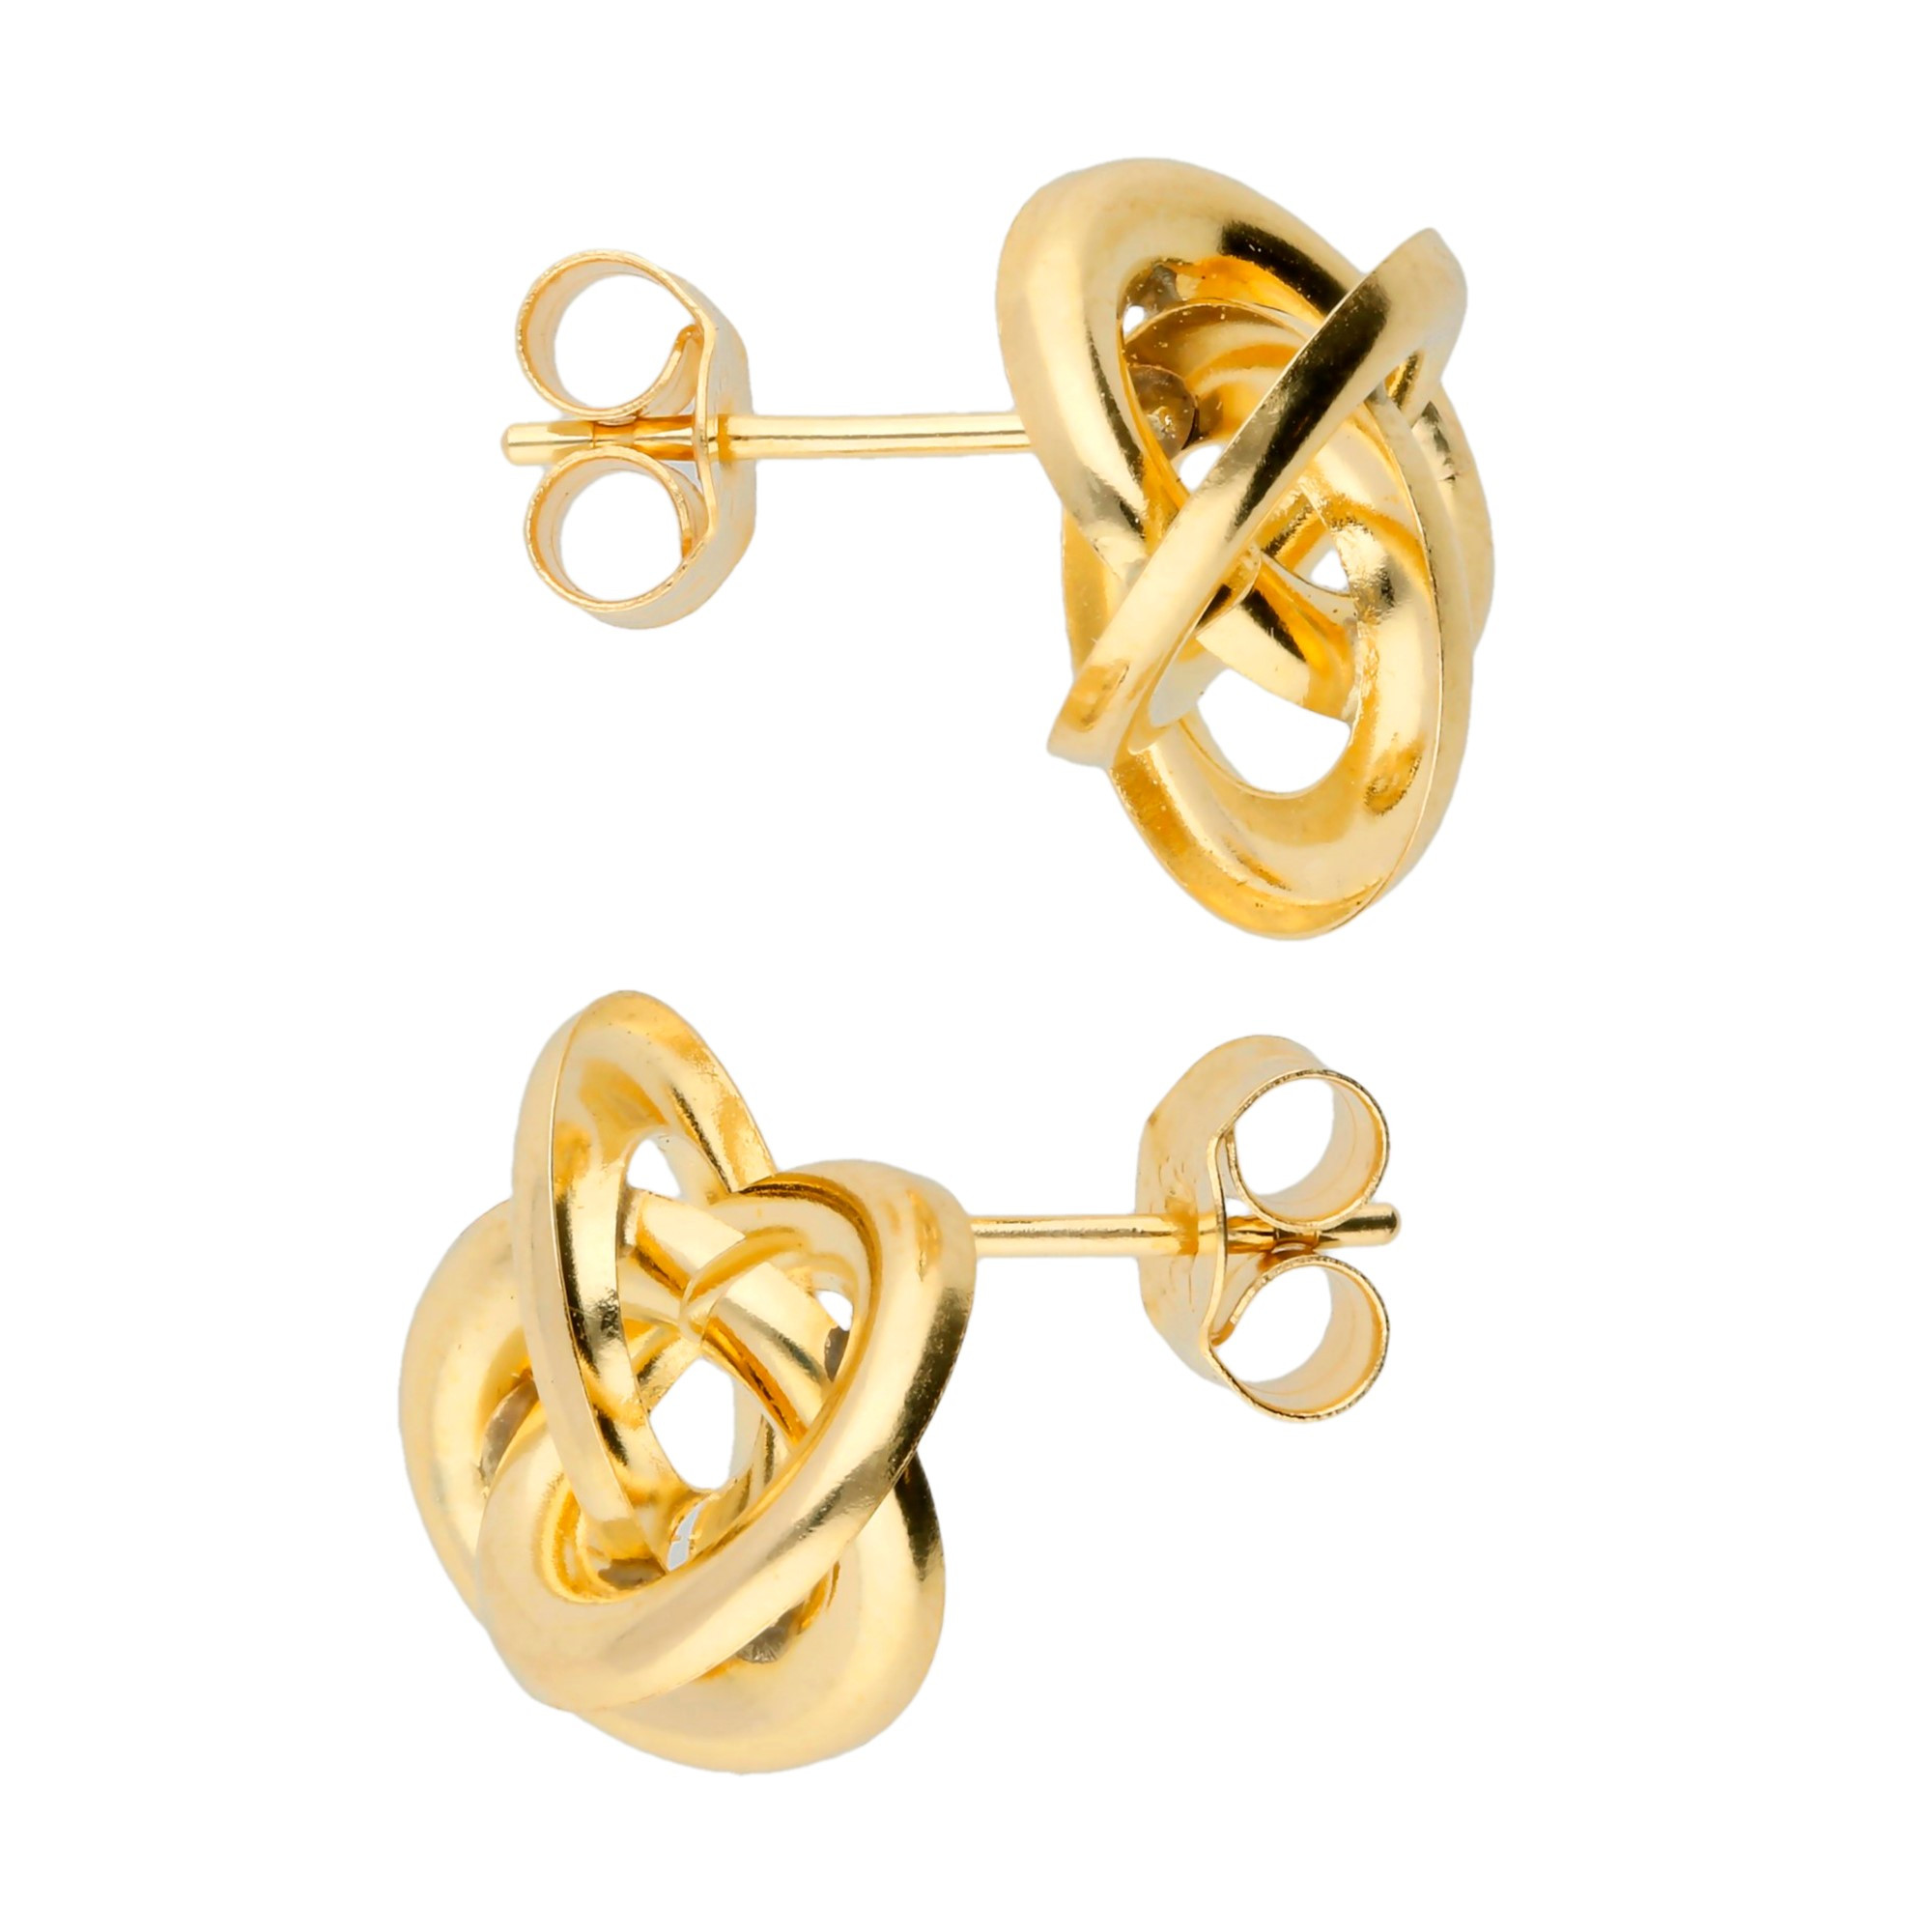 9ct Yellow Gold Large Knot Stud Earrings | Buy Online | Free Insured UK ...